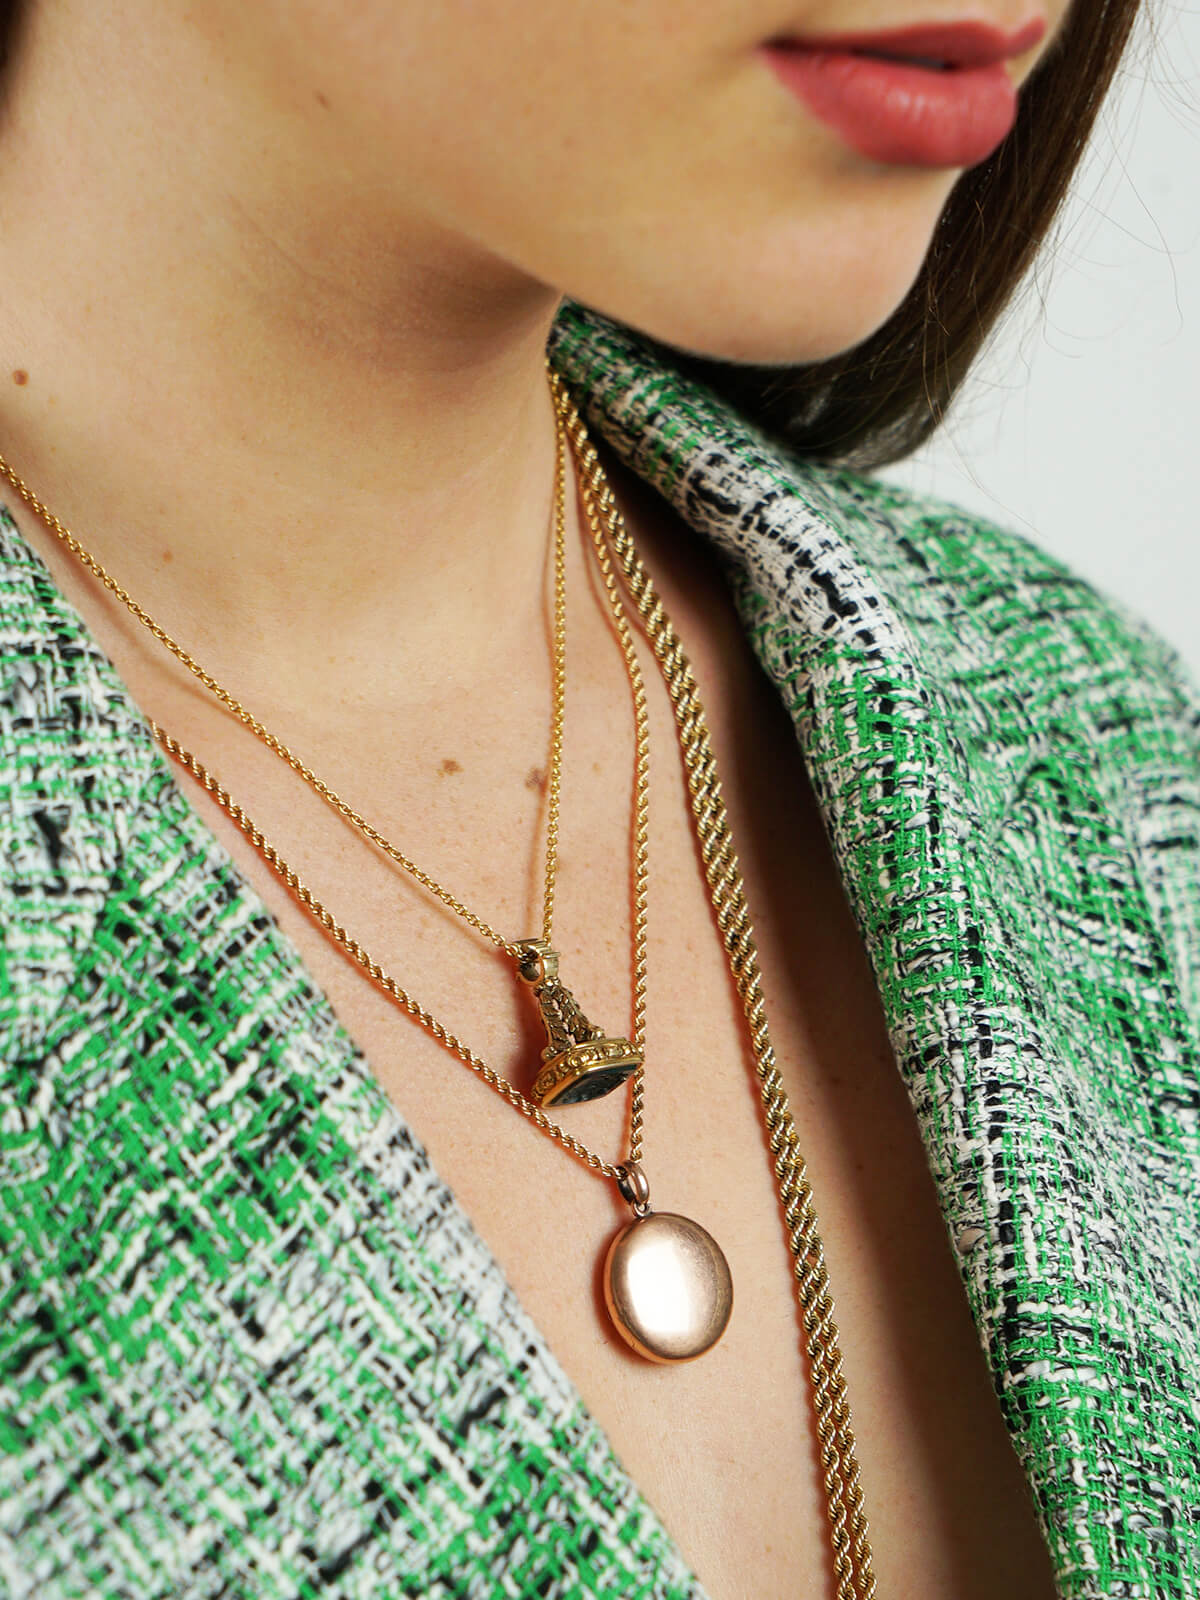 Layer your seal with chains and lockets